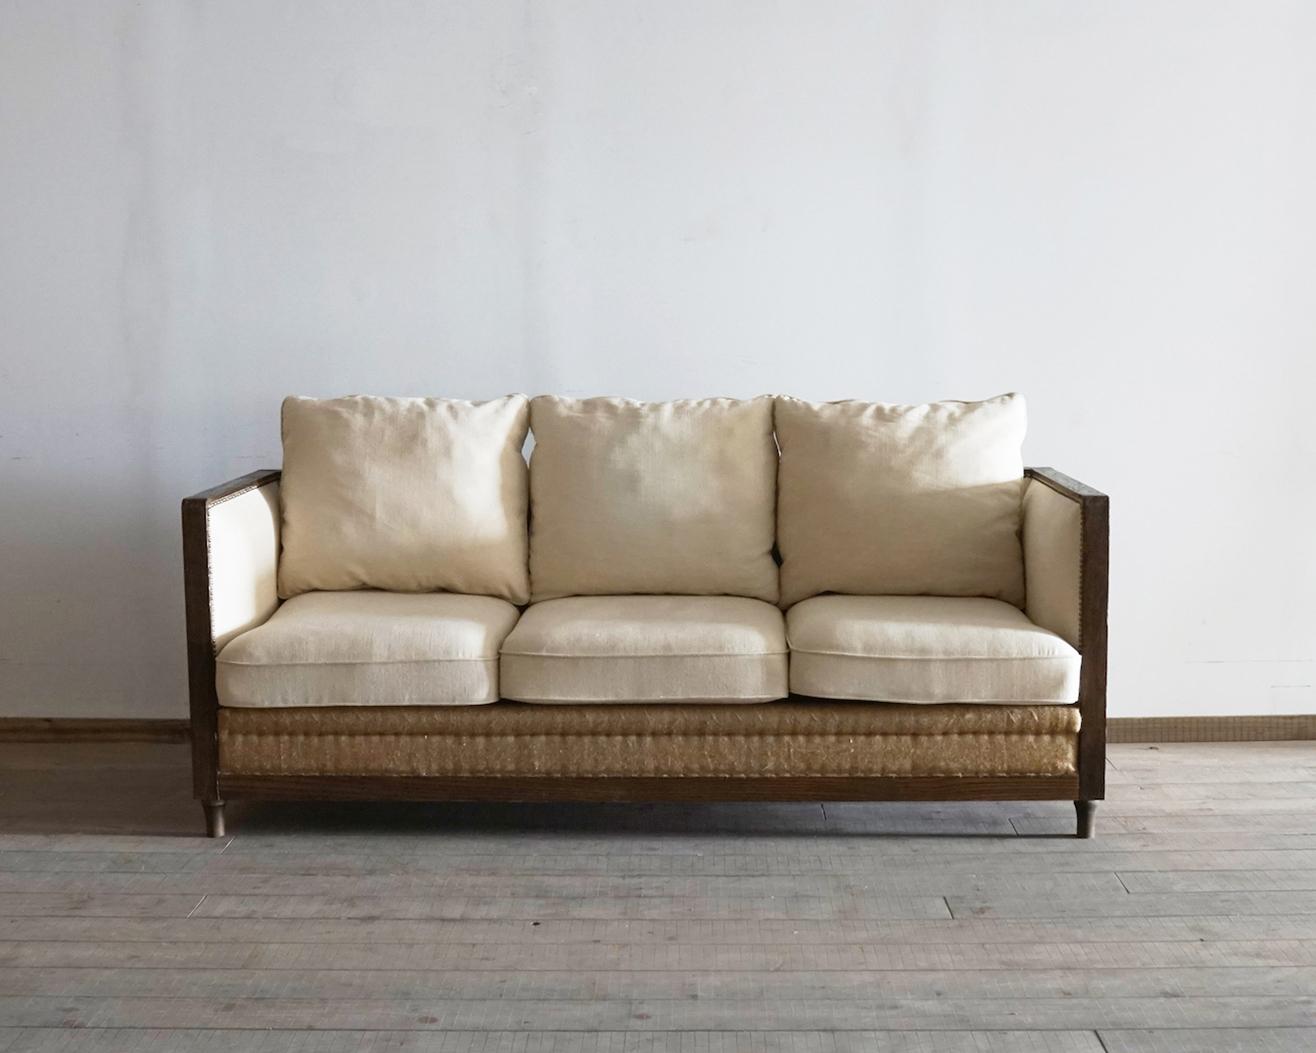 deconstructed couch